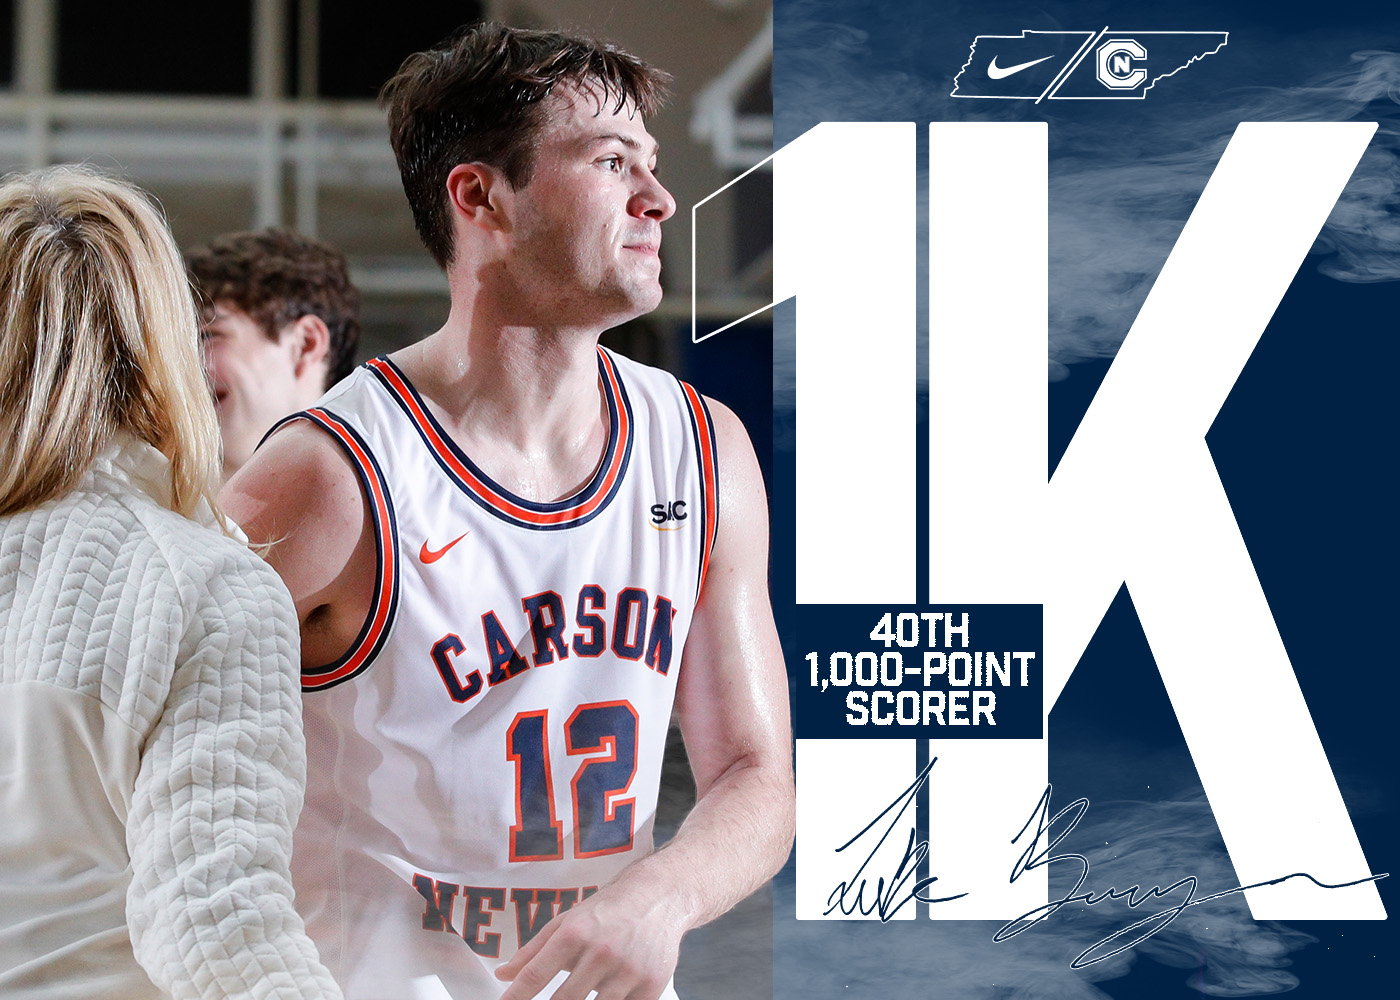 Brenegan joins 1,000-point club in loss to Limestone